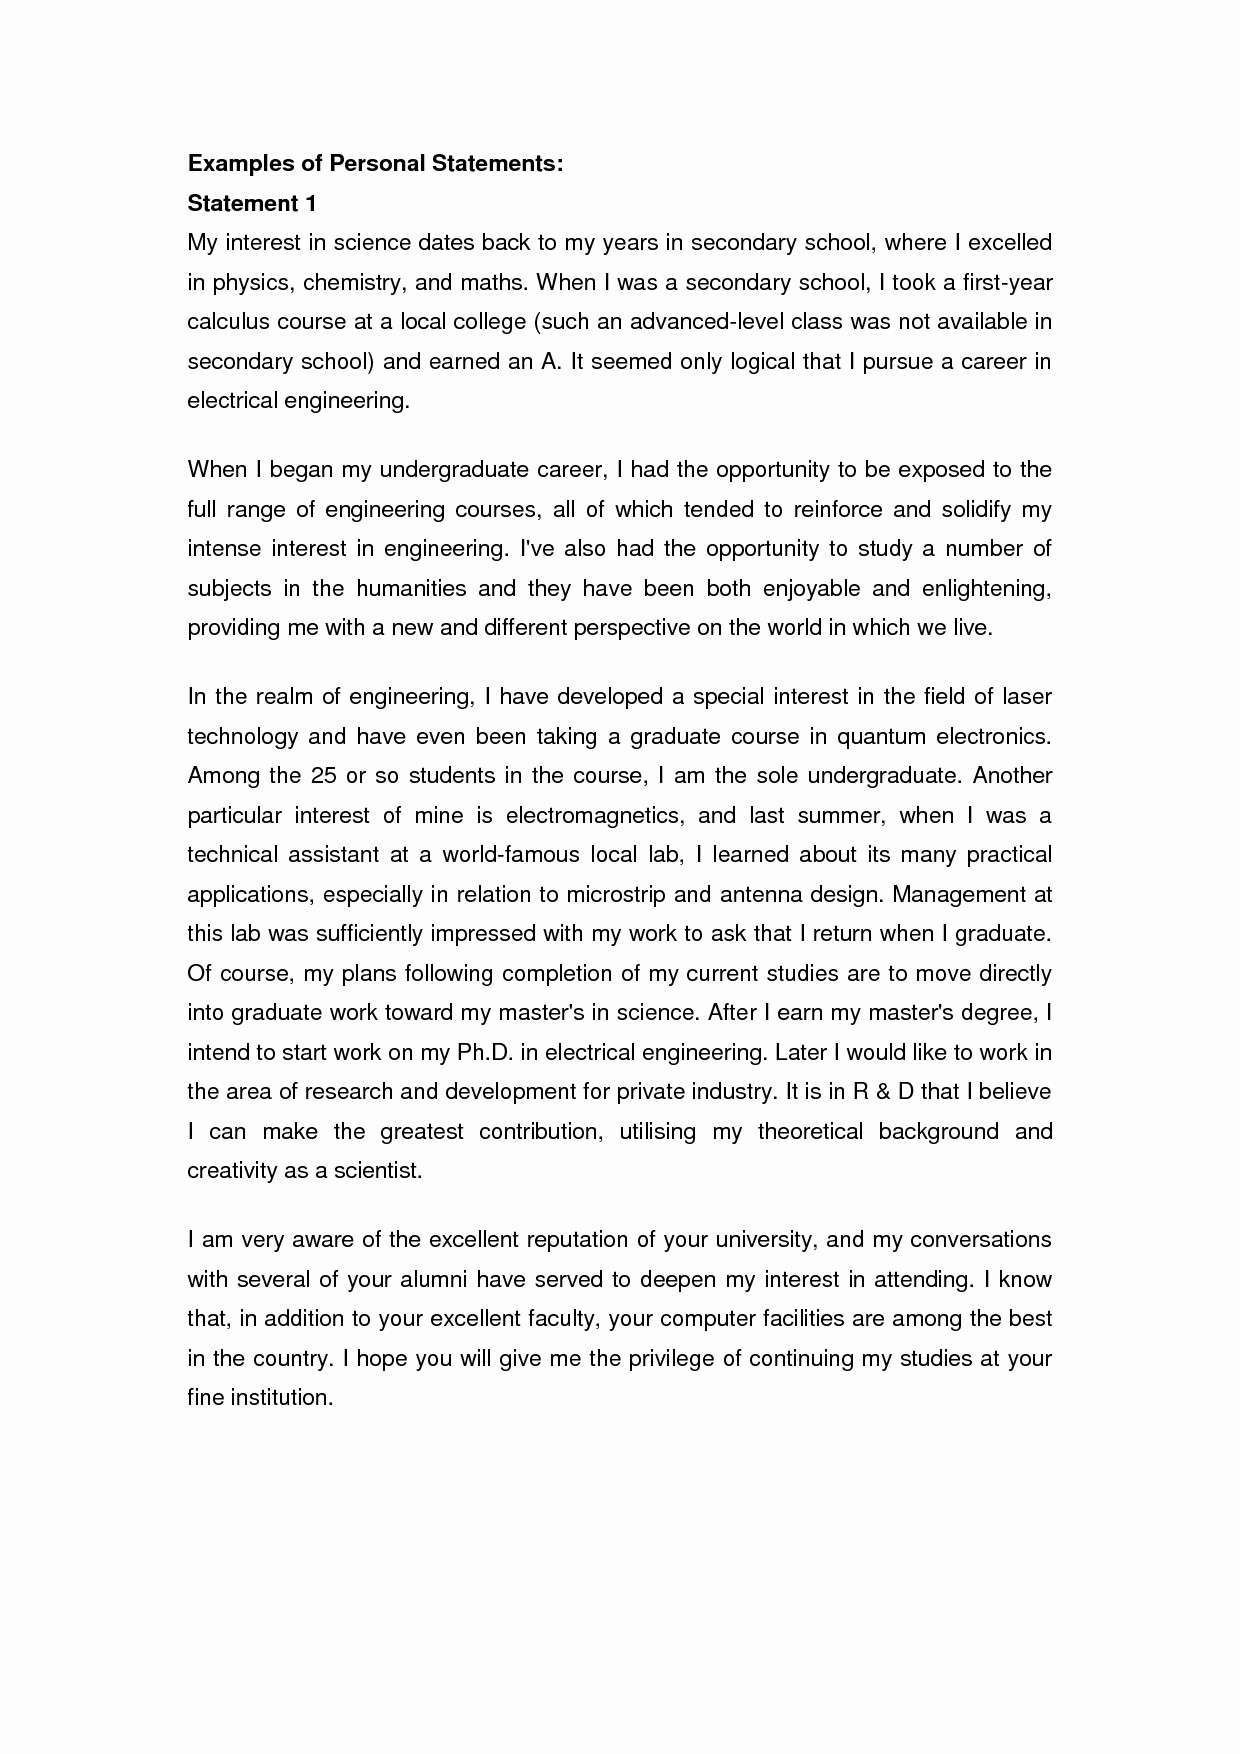 Graduate School Personal Statement Examples | Personal Statement for Graduate School Personal Statement Template